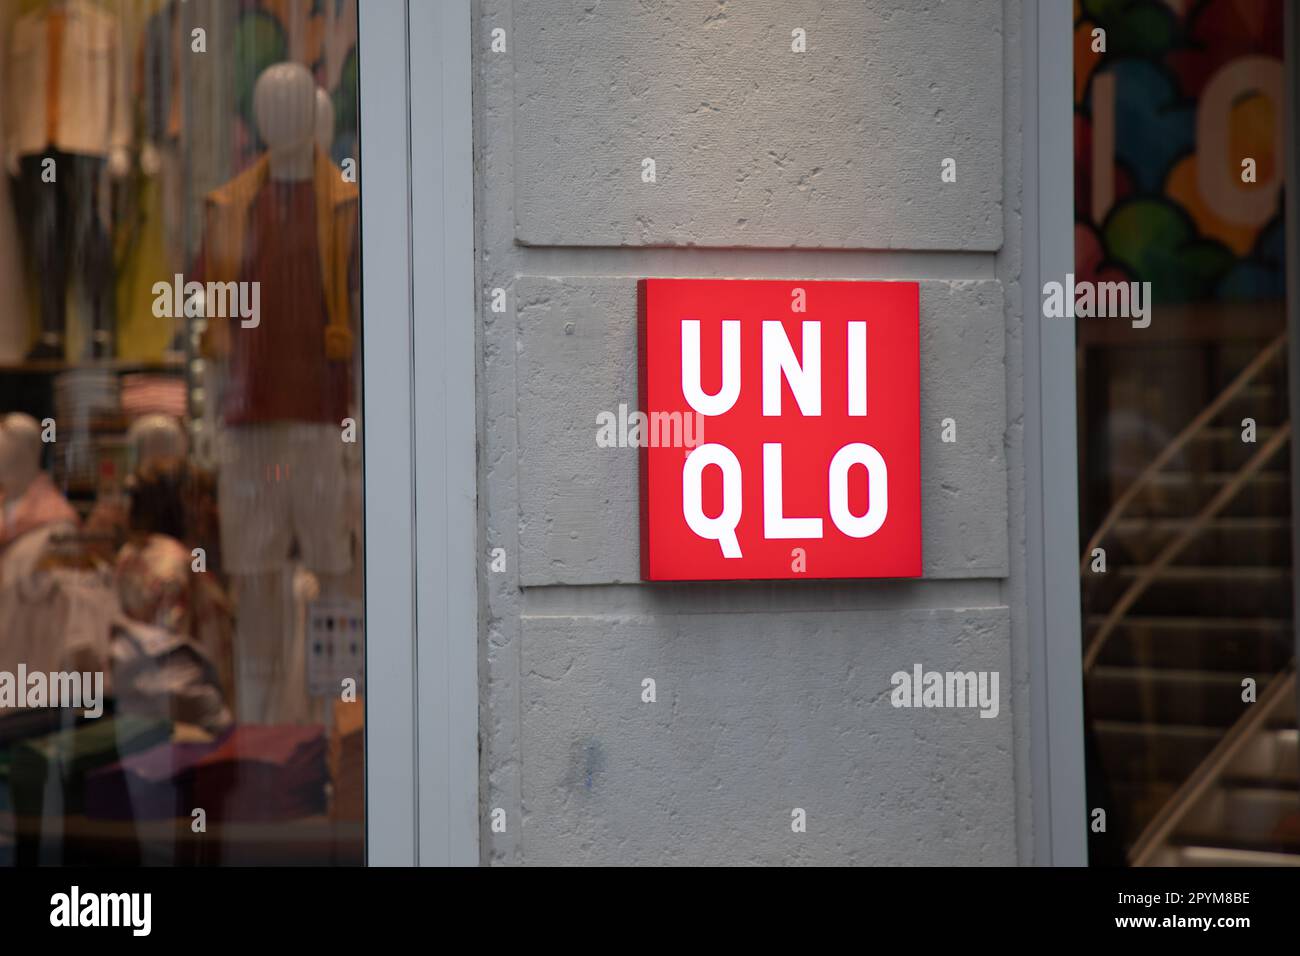 433 Uniqlo Logo Photos and Premium High Res Pictures  Getty Images